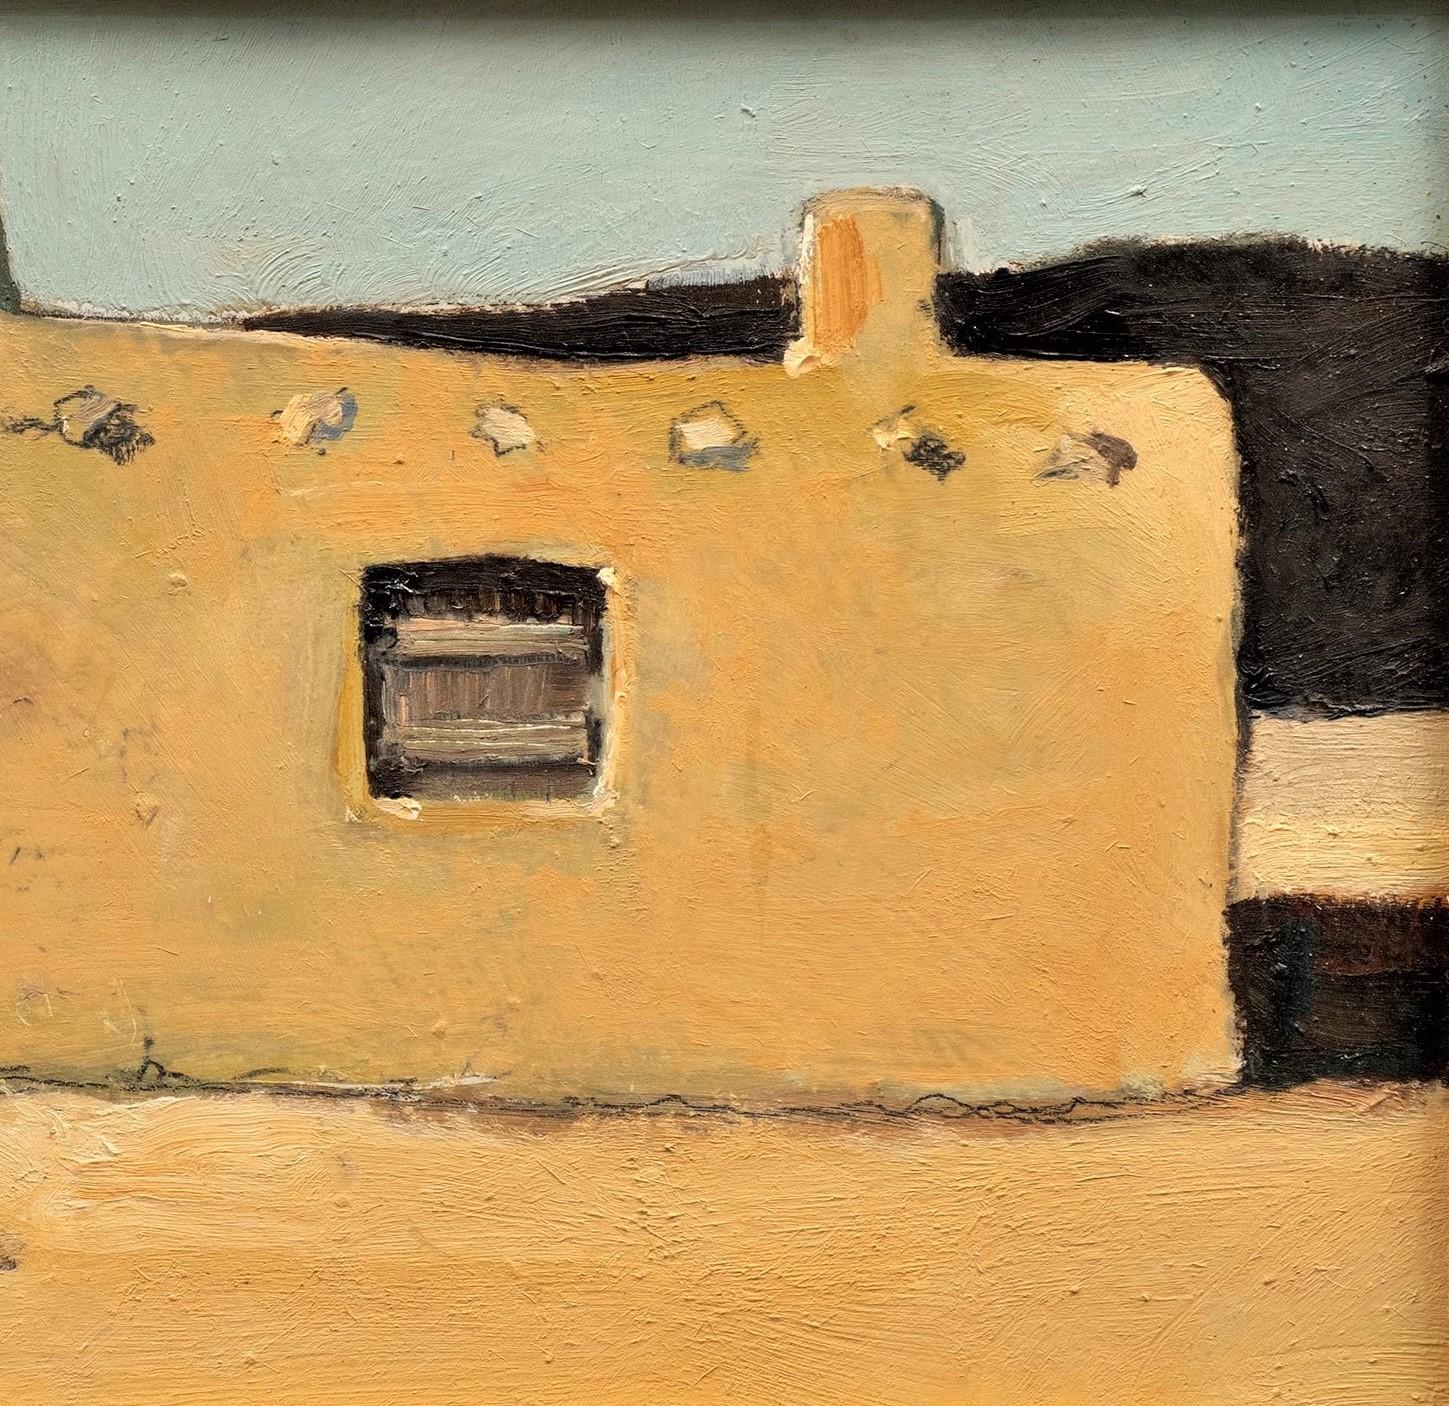 Taos Adobe
Eric Sloane (American, 1905-1985)
Oil on board
Signed front and back
6 1/2 x 13 (11 1/2 x 18 frame) inches

Artist, author and folklorist, Eric Sloane, is best known for his paintings of New England farmscapes and his illustrated books of